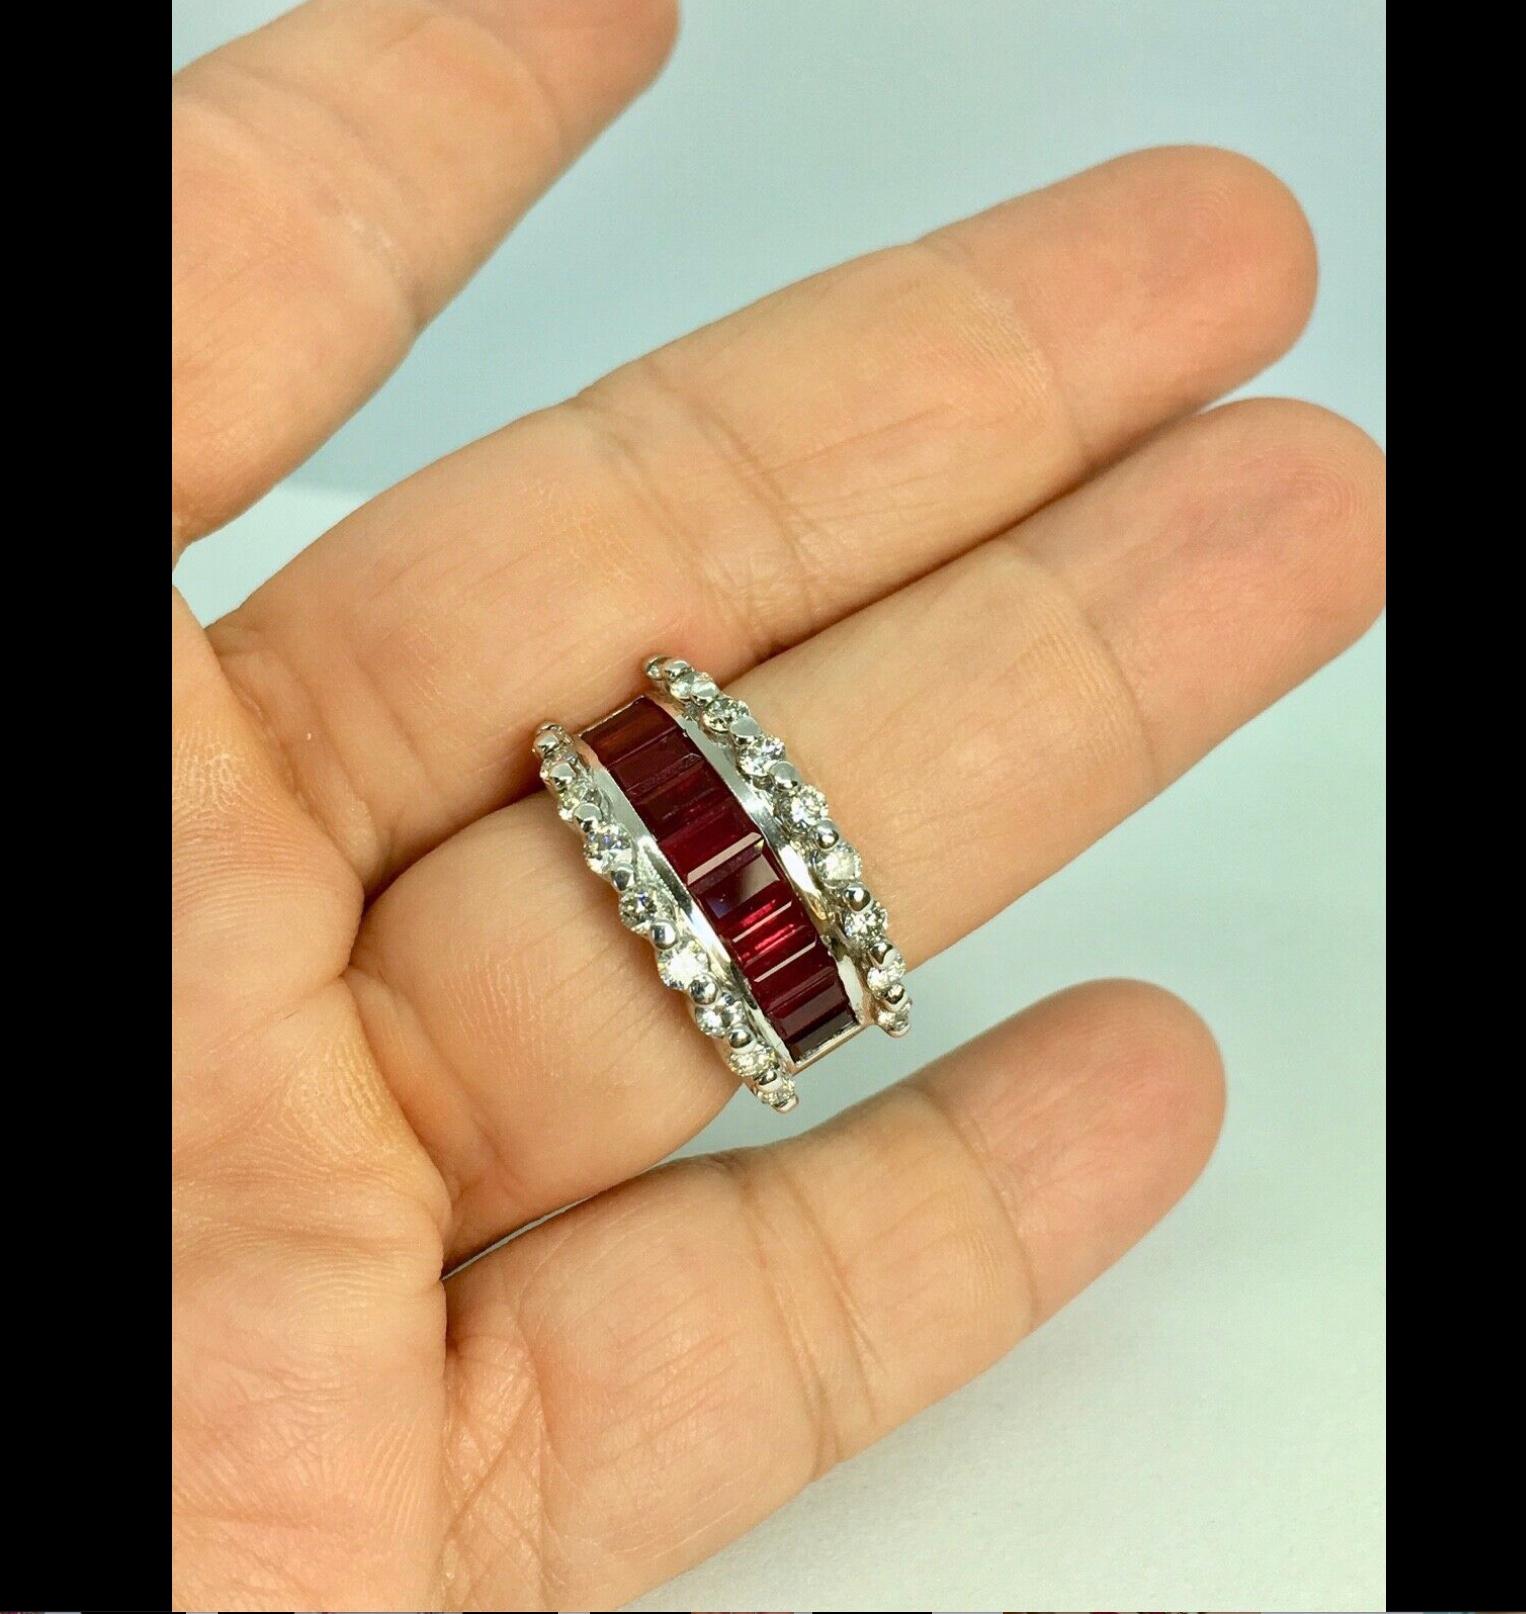 Channel Set Natural Ruby Weighing: 2.95 Carat. Second stone; natural round brilliant cut diamond weighing 1.00 carat, clarity VS2-SI1/ color G-H
Total gemstone weight: 3.95 Carat
Total Ring Weight: 7.9 Grams
Wide: 12 mm
Size: 7.75 
Condition: Used /